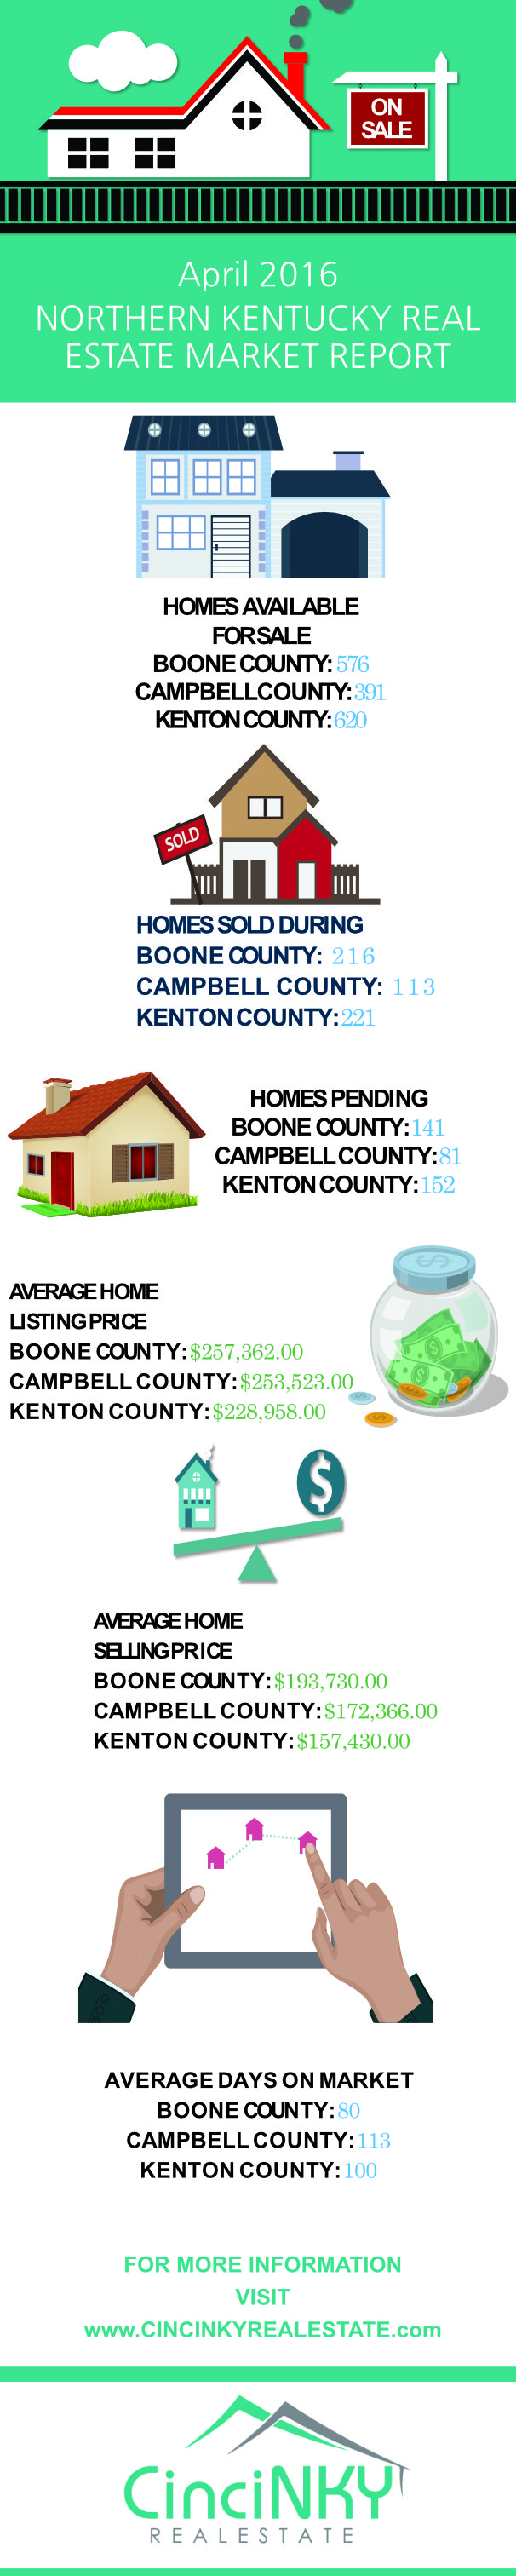 April 2016 Northern Kentucky Real Estate Market Report infographic